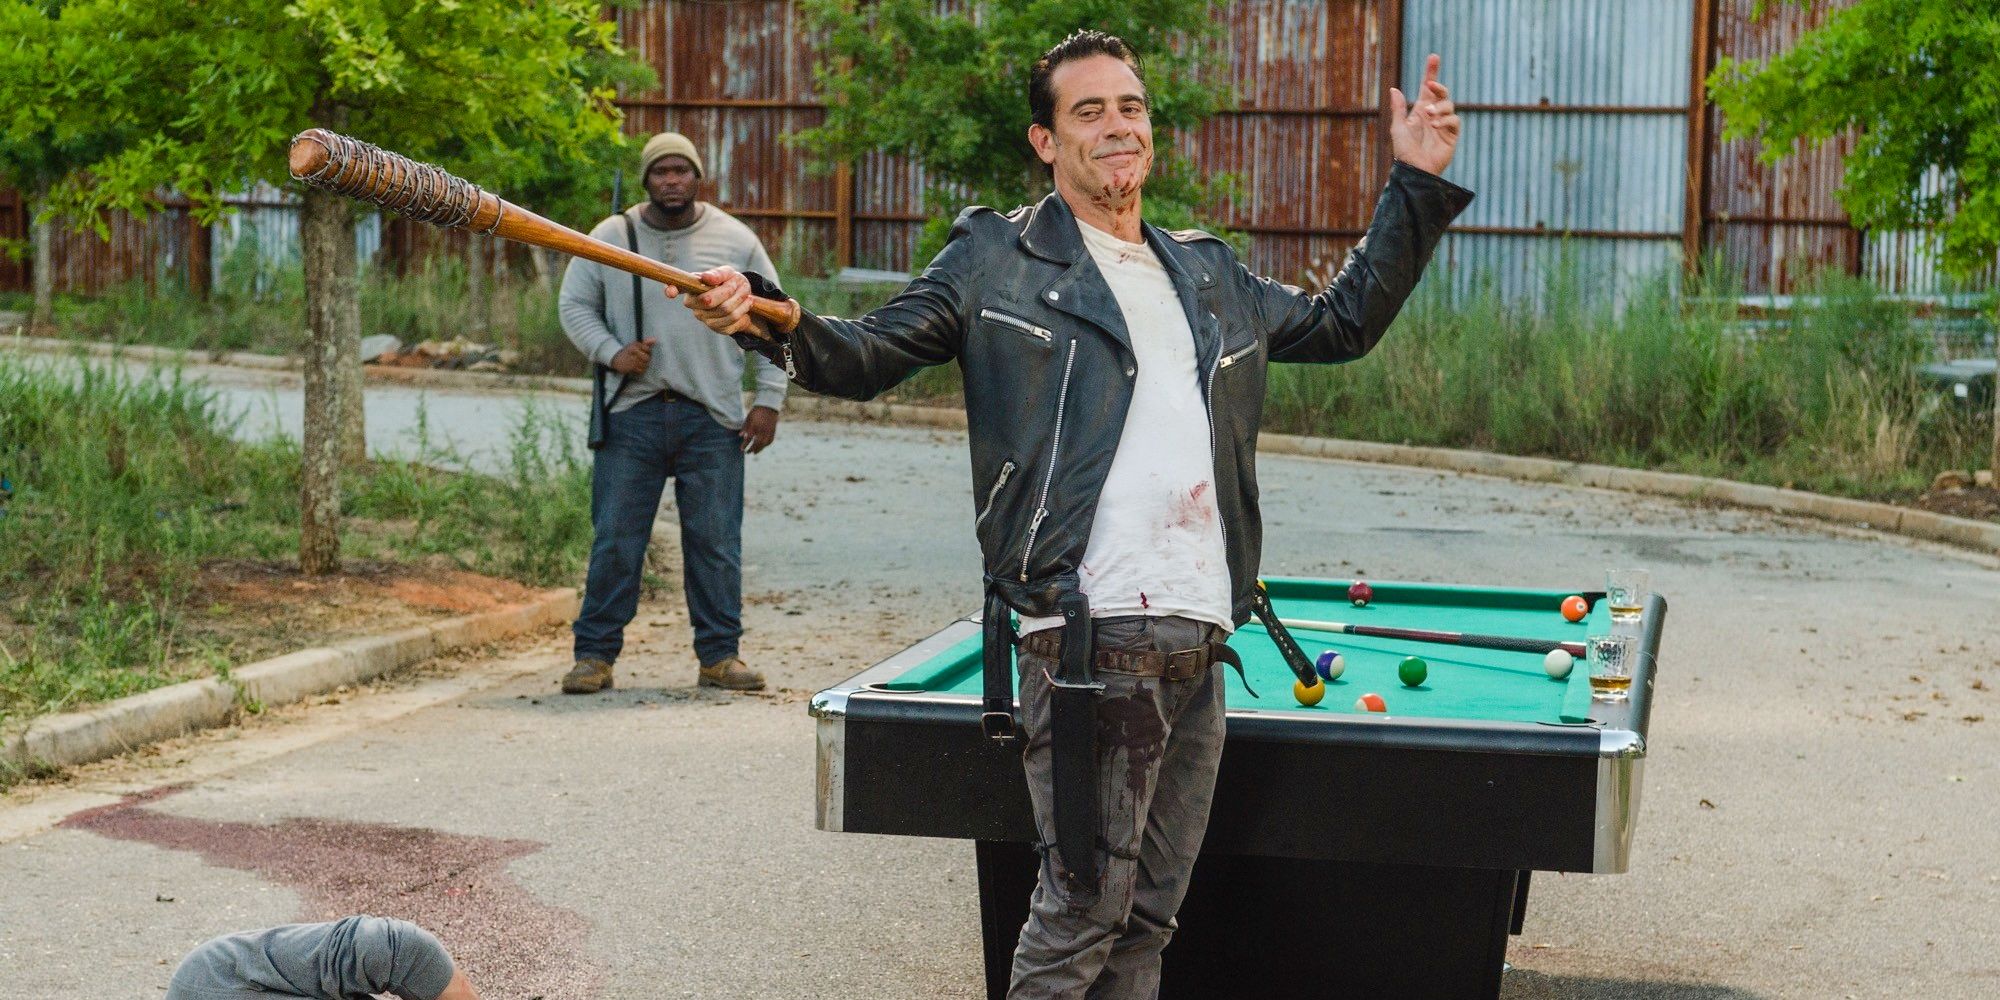 Negan standing in Alexandria, arms outstretched holding Lucille with a pool table behind him.